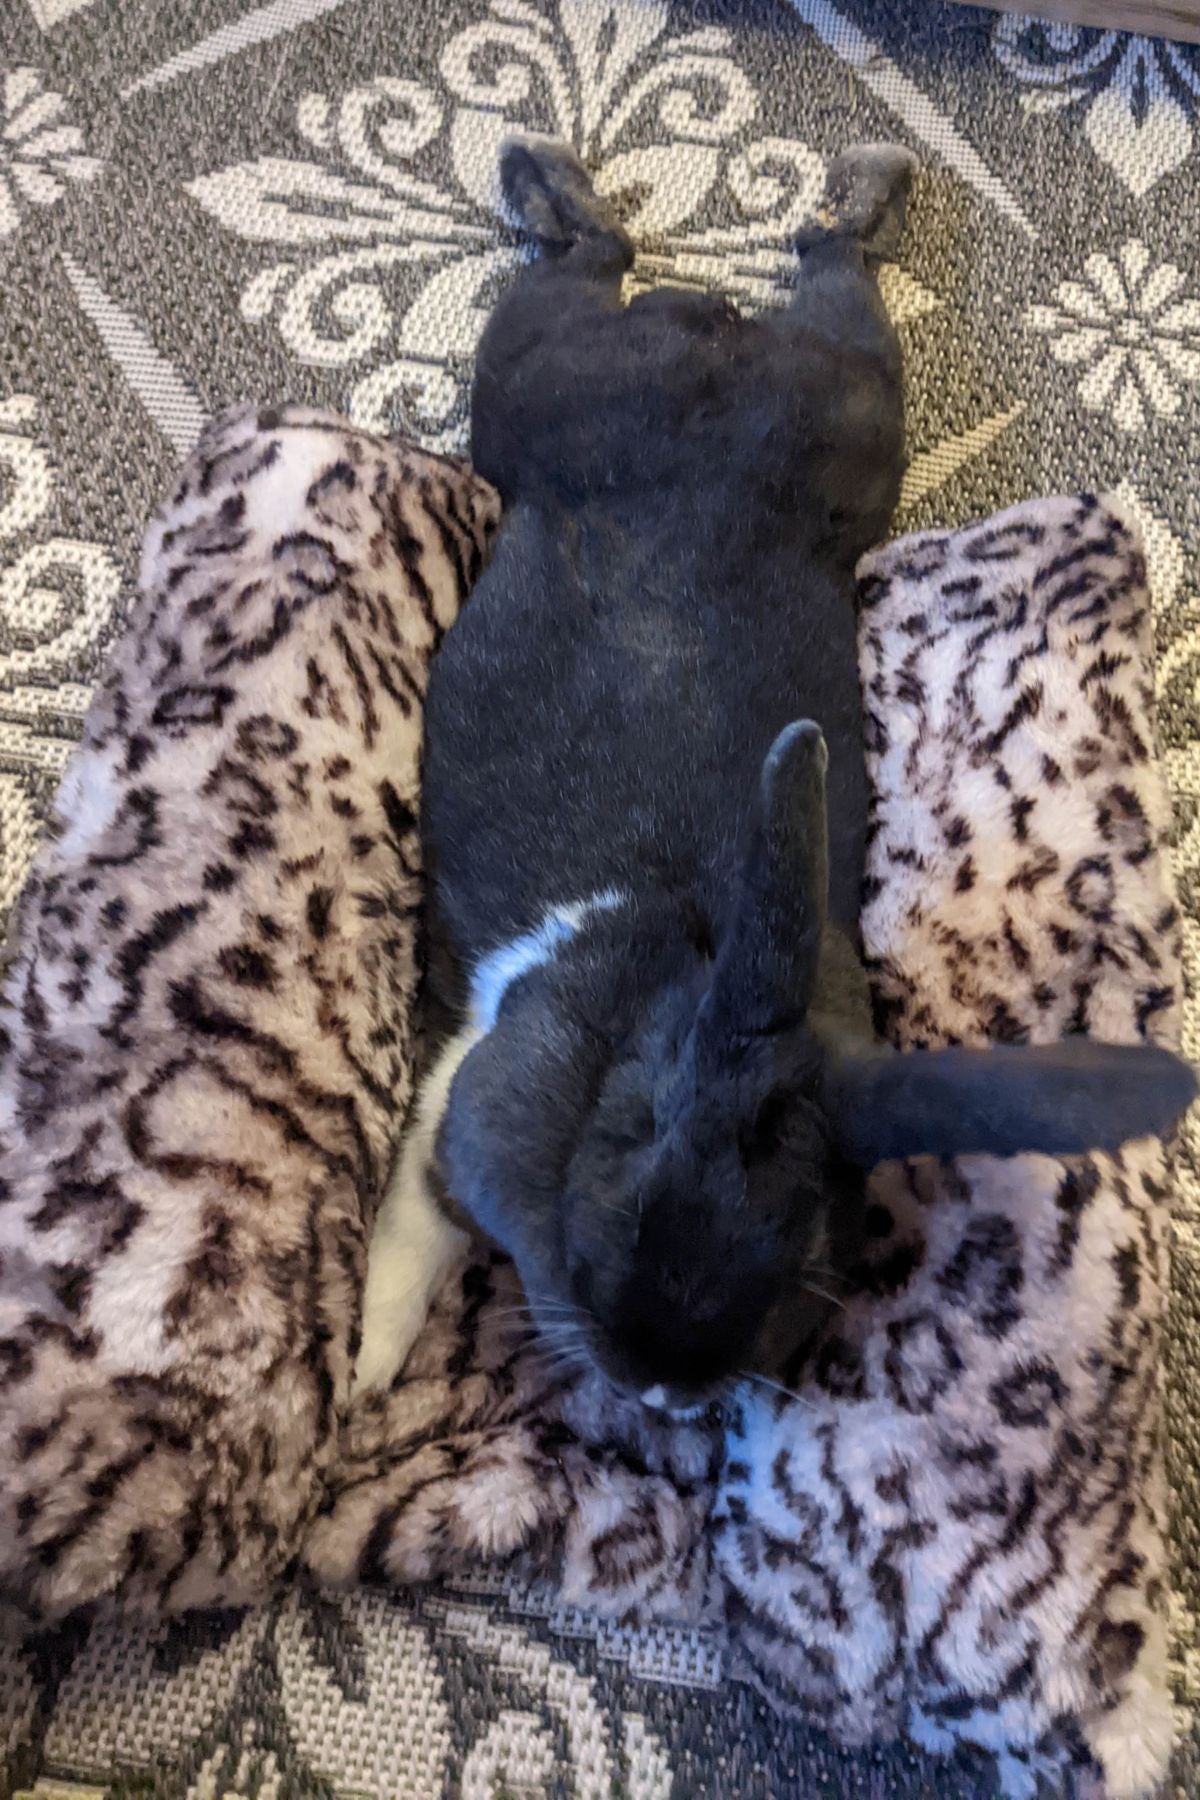 Bunny rabbit splooting out in Snow Leopard Pet Bed, in Royal Opulence Faux Fur. Handmade in Seattle, WA by Pandemonium Millinery.